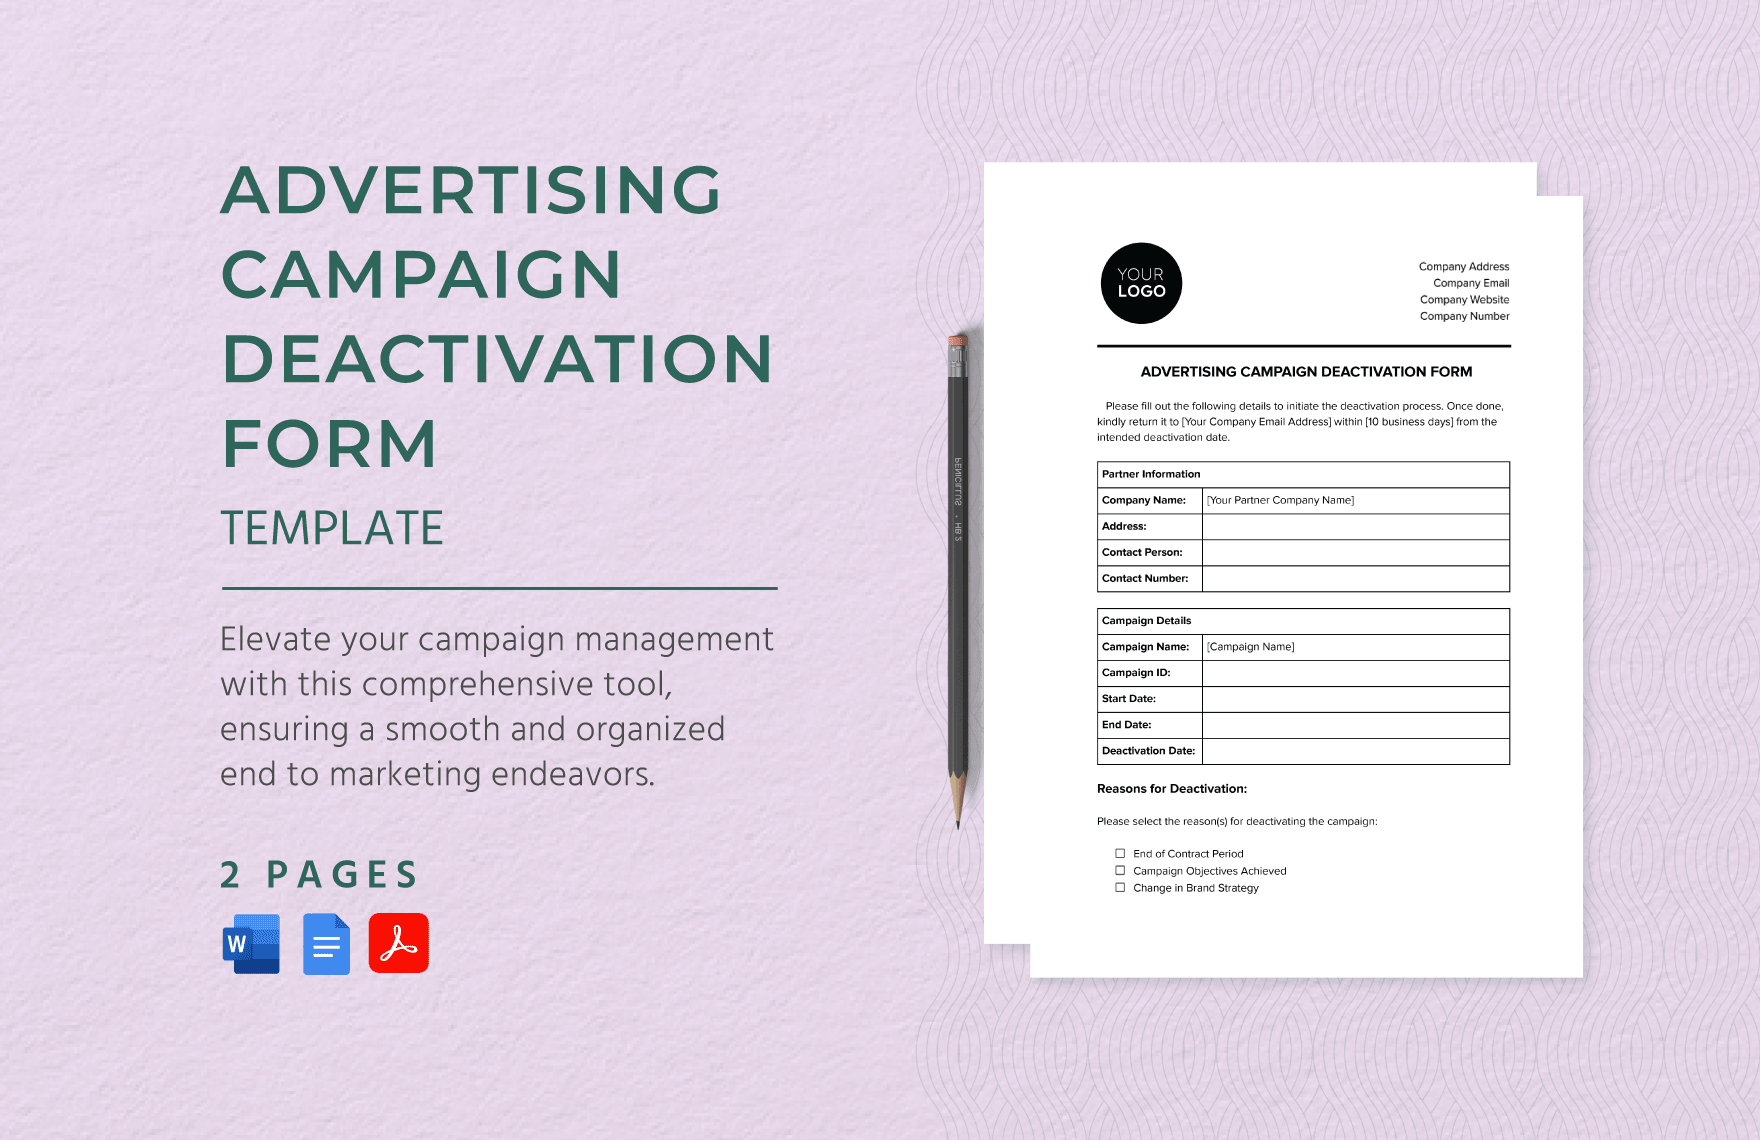 Advertising Campaign Deactivation Form Template in Word, Google Docs, PDF